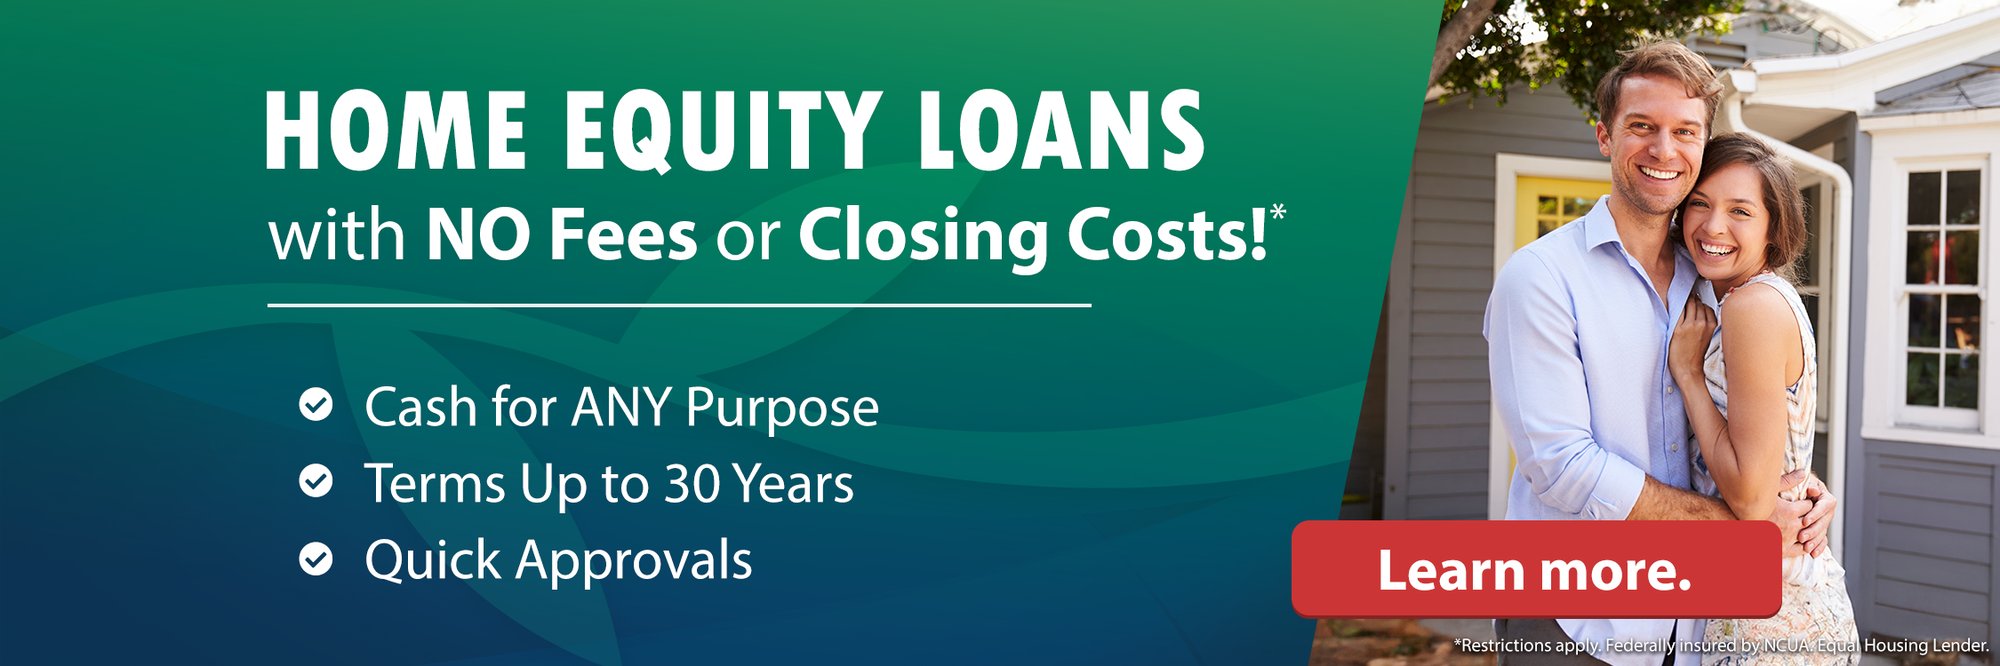 Home Equity Loans with NO Fees or Closing Costs!* Cash for ANY Purpose. Terms Up to 30 Years. Quick Approvals. Learn more. (*Restrictions apply. Federally insured by NCUA. Equal Housing Lender.)